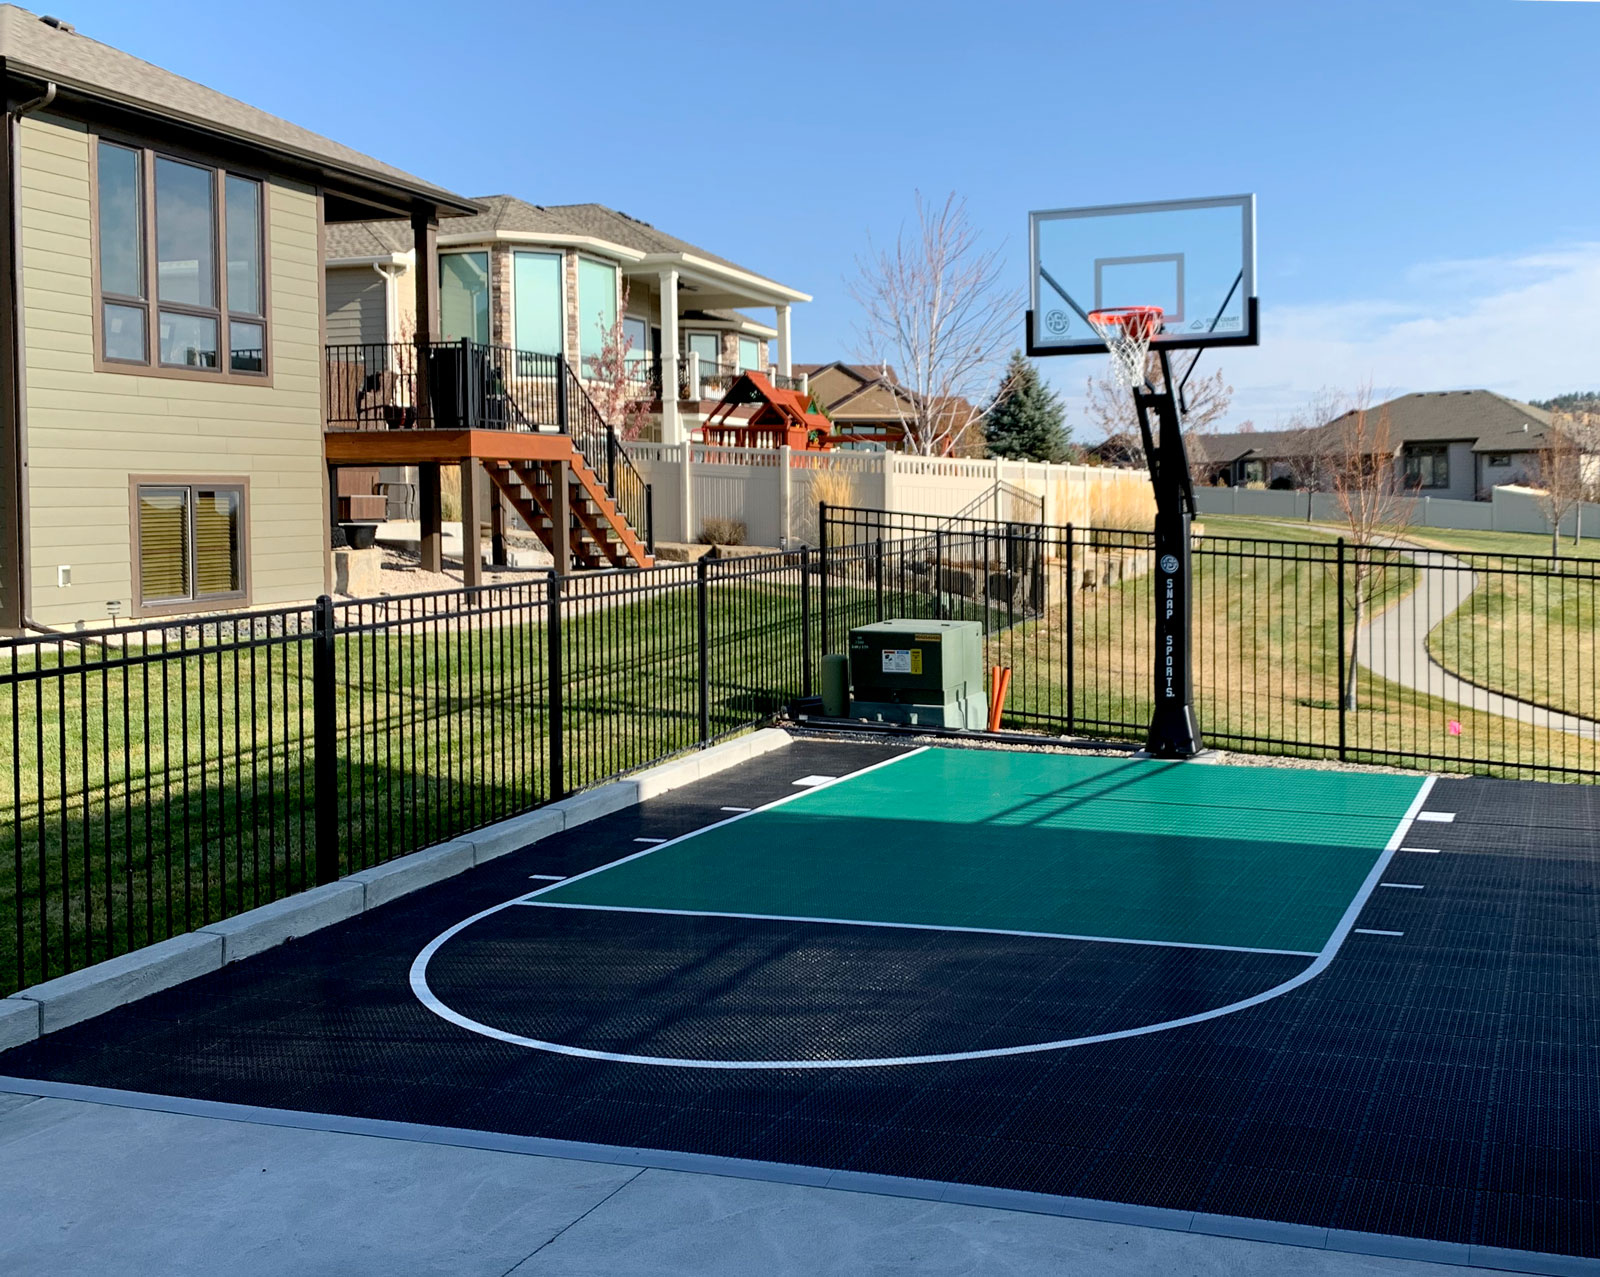 Small basketball half court with black and shamrock colors